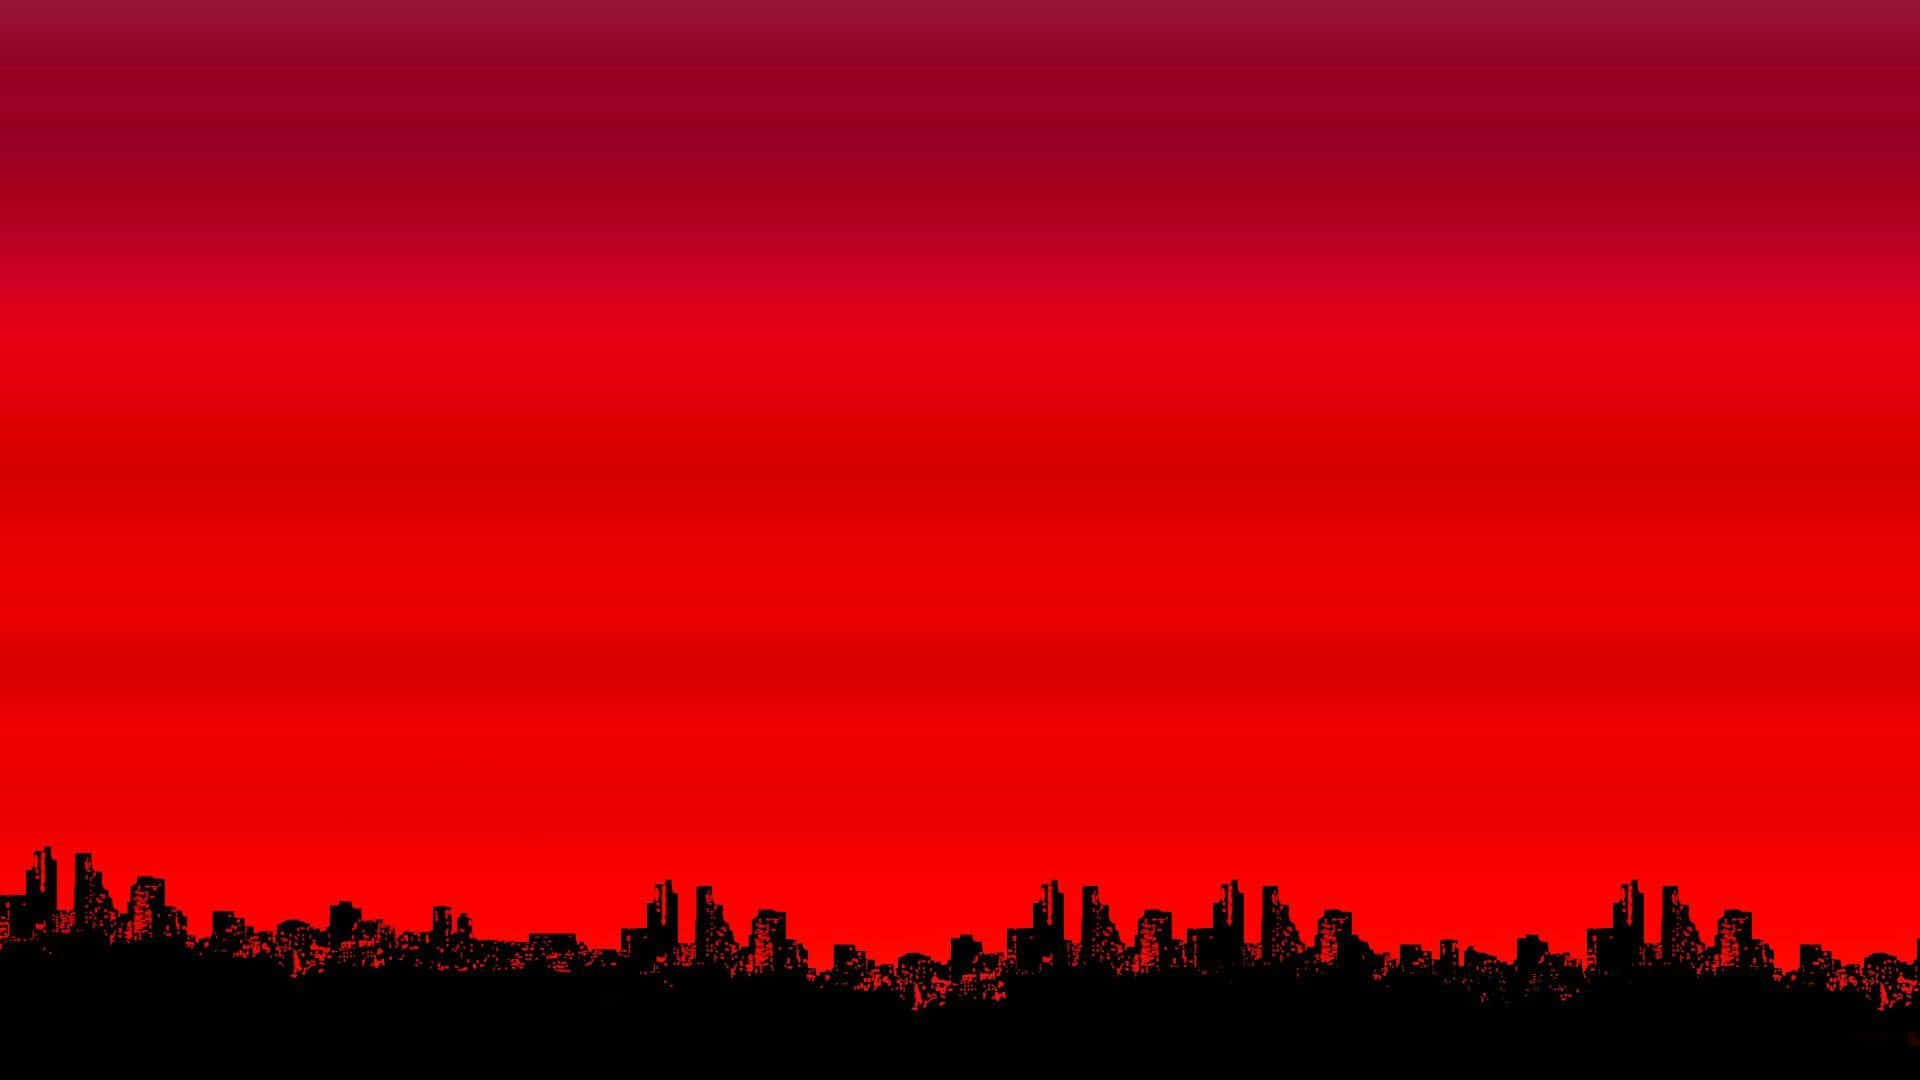 A Red Sky With A City In The Background